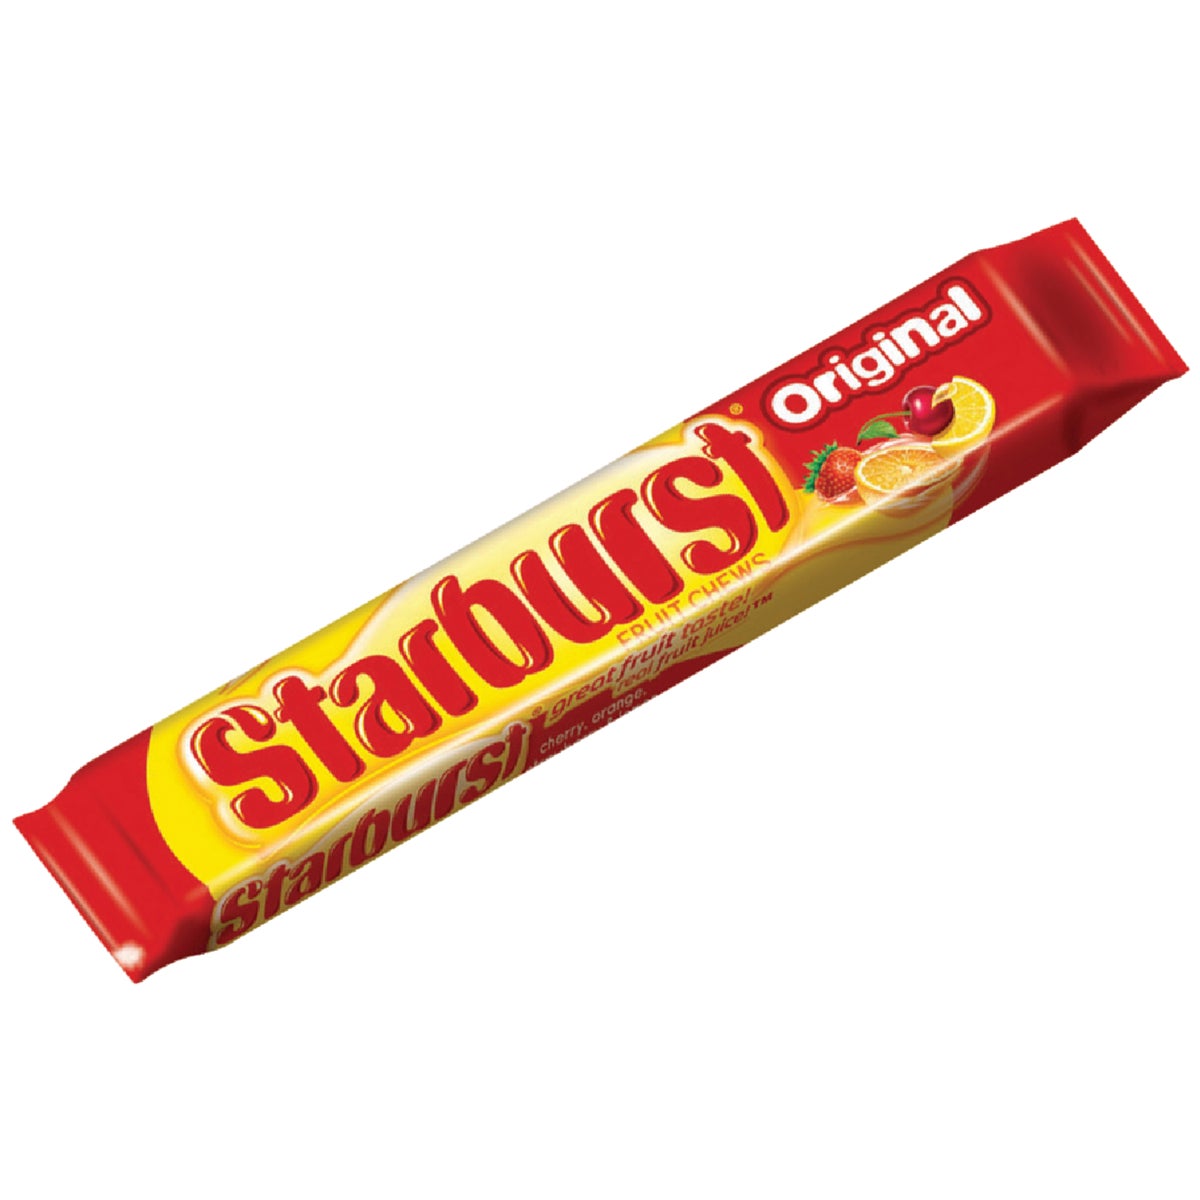 Starburst Assorted Fruit Flavors Candy